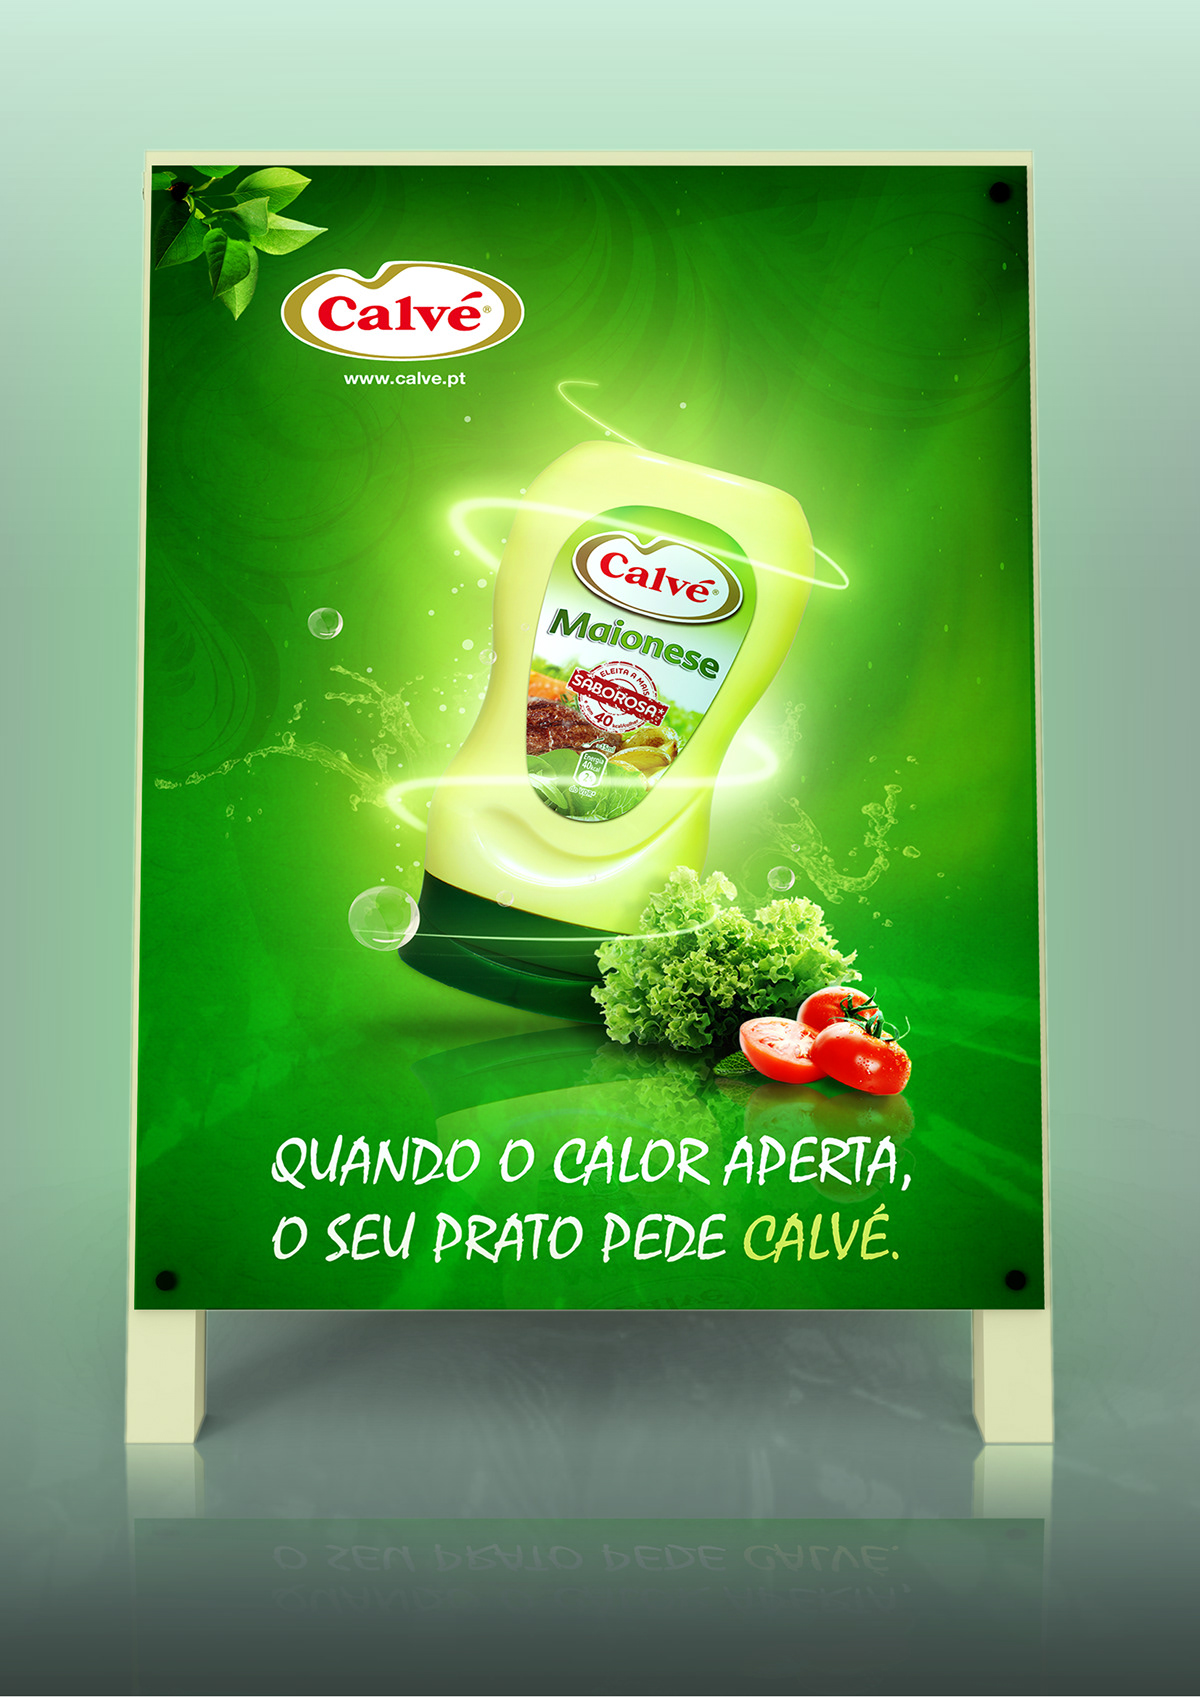 Calve  FOOD  DRINK  graphic design  light  green  in-store